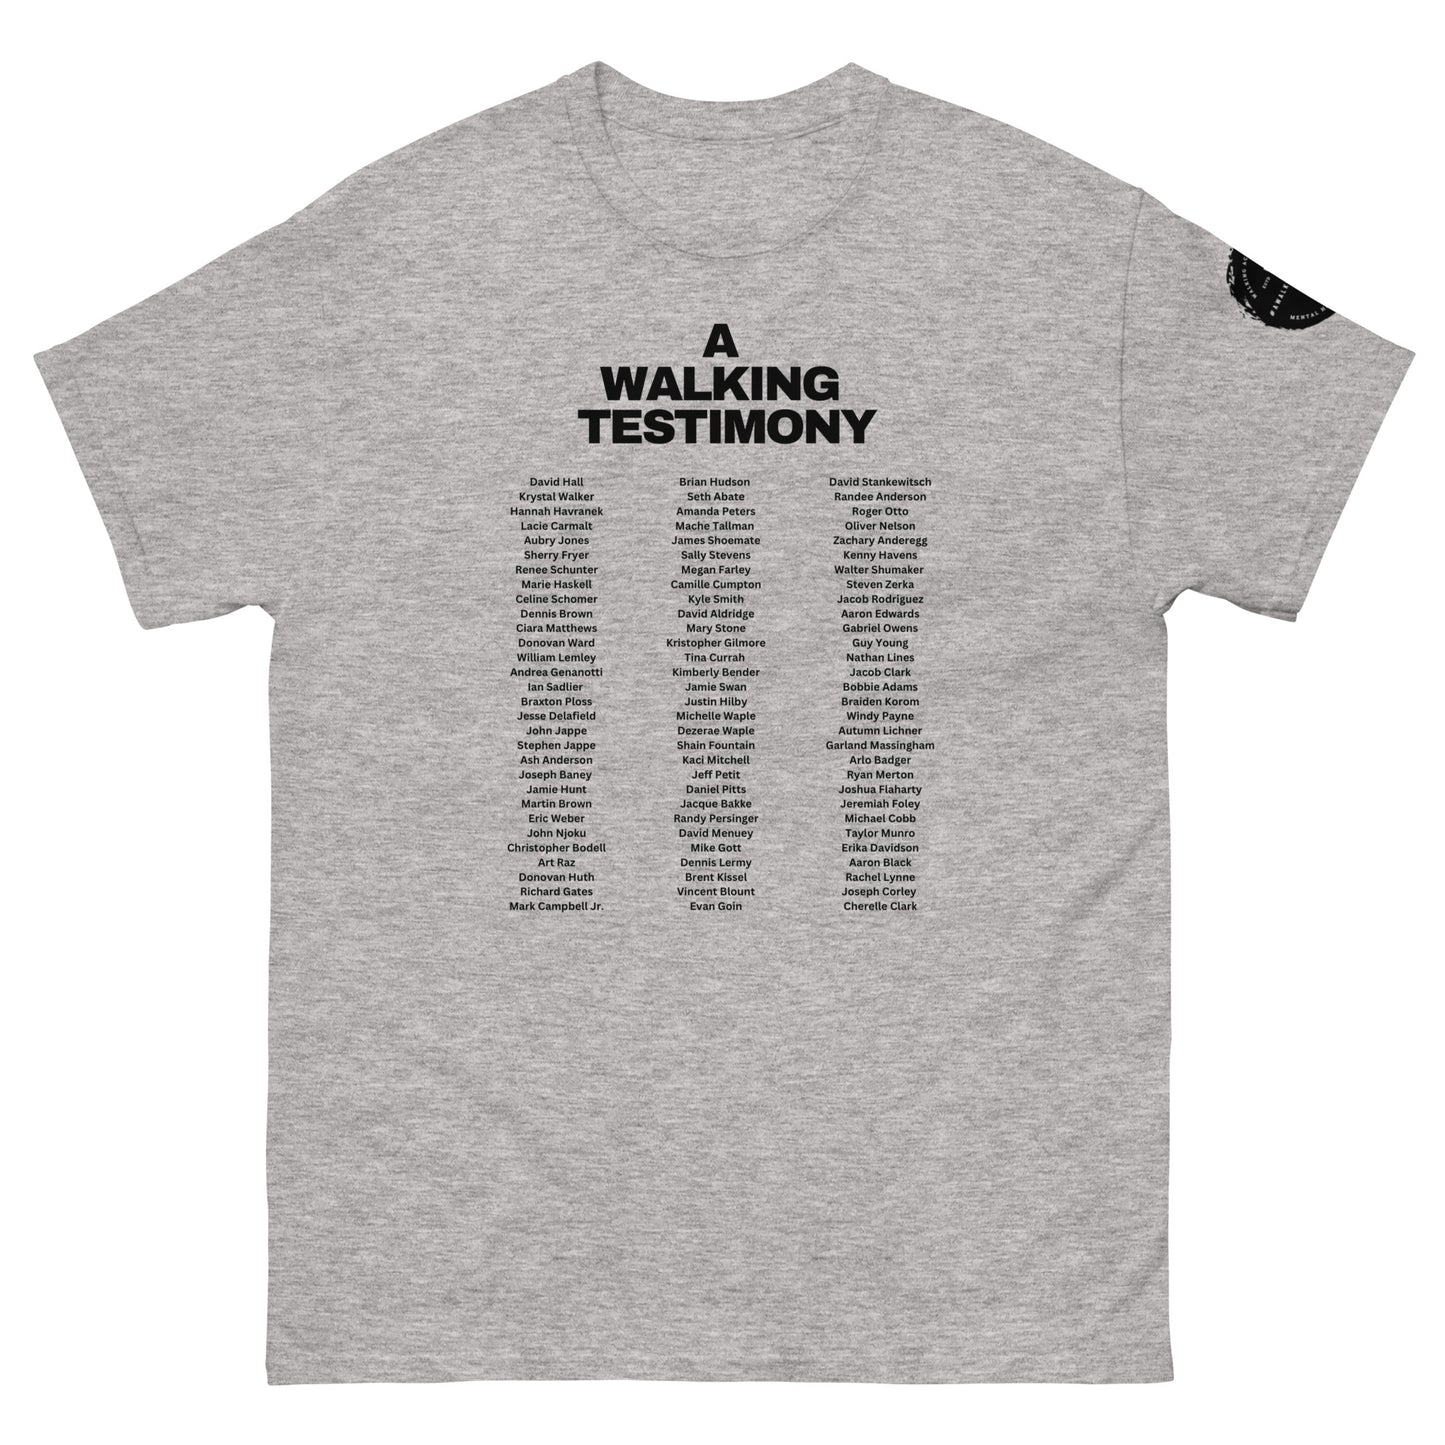 Official A Walking Testimony Tee 6th Edition (light colors)